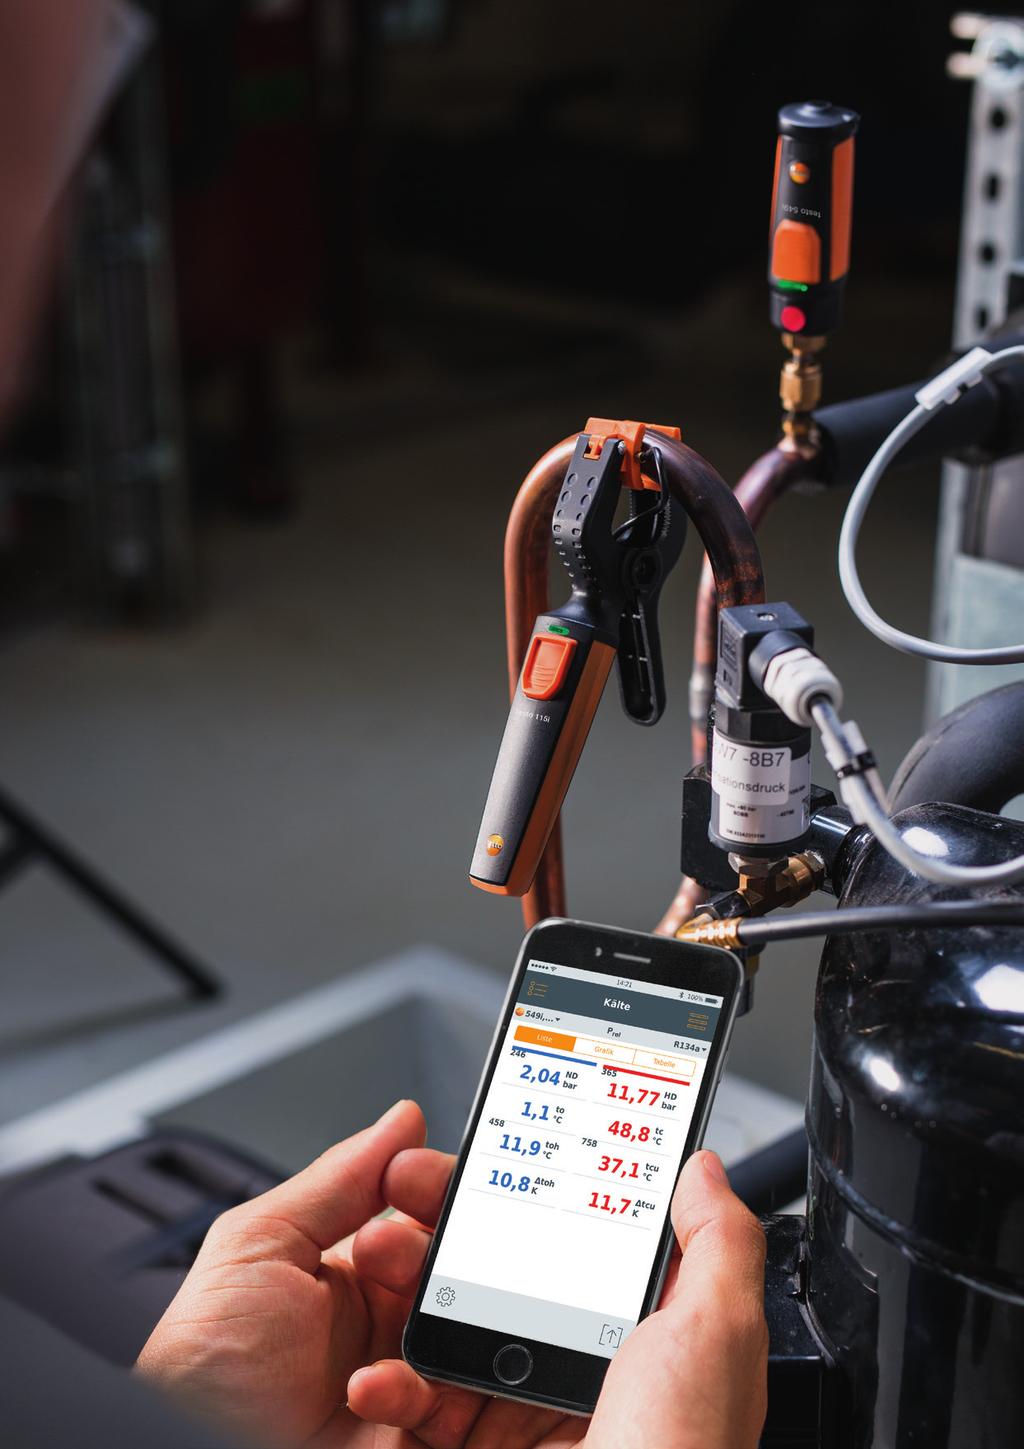 Smart Probes: small, professional measuring instruments optimized for your smartphone.